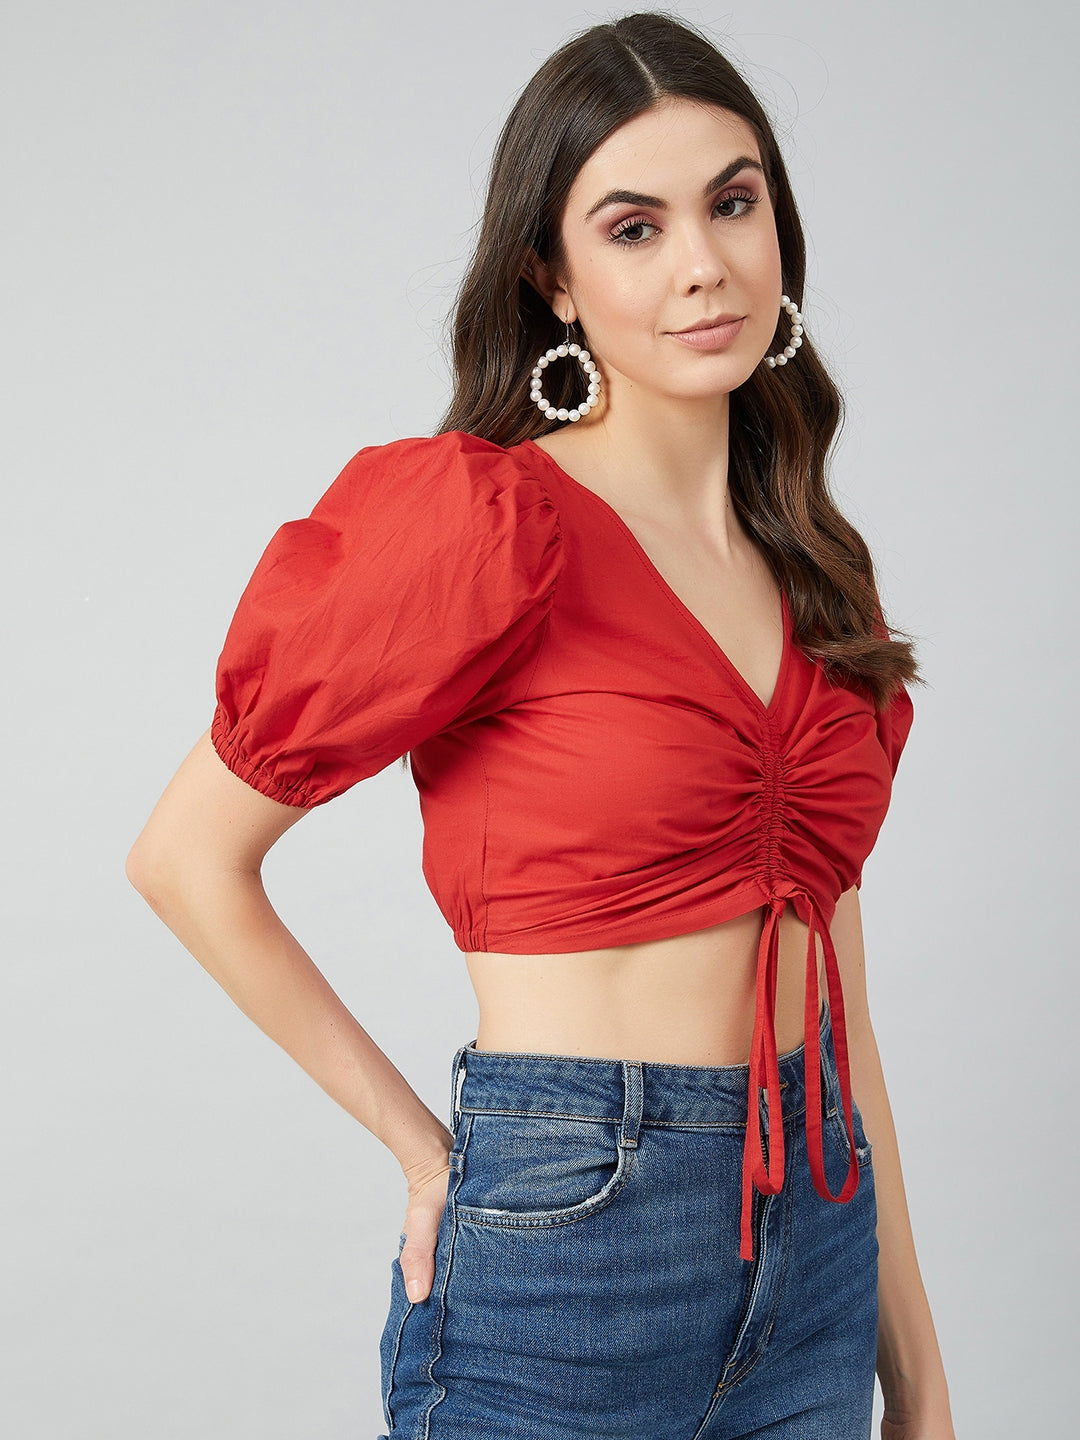 Athena Women Red Solid Fitted Crop Top - Athena Lifestyle